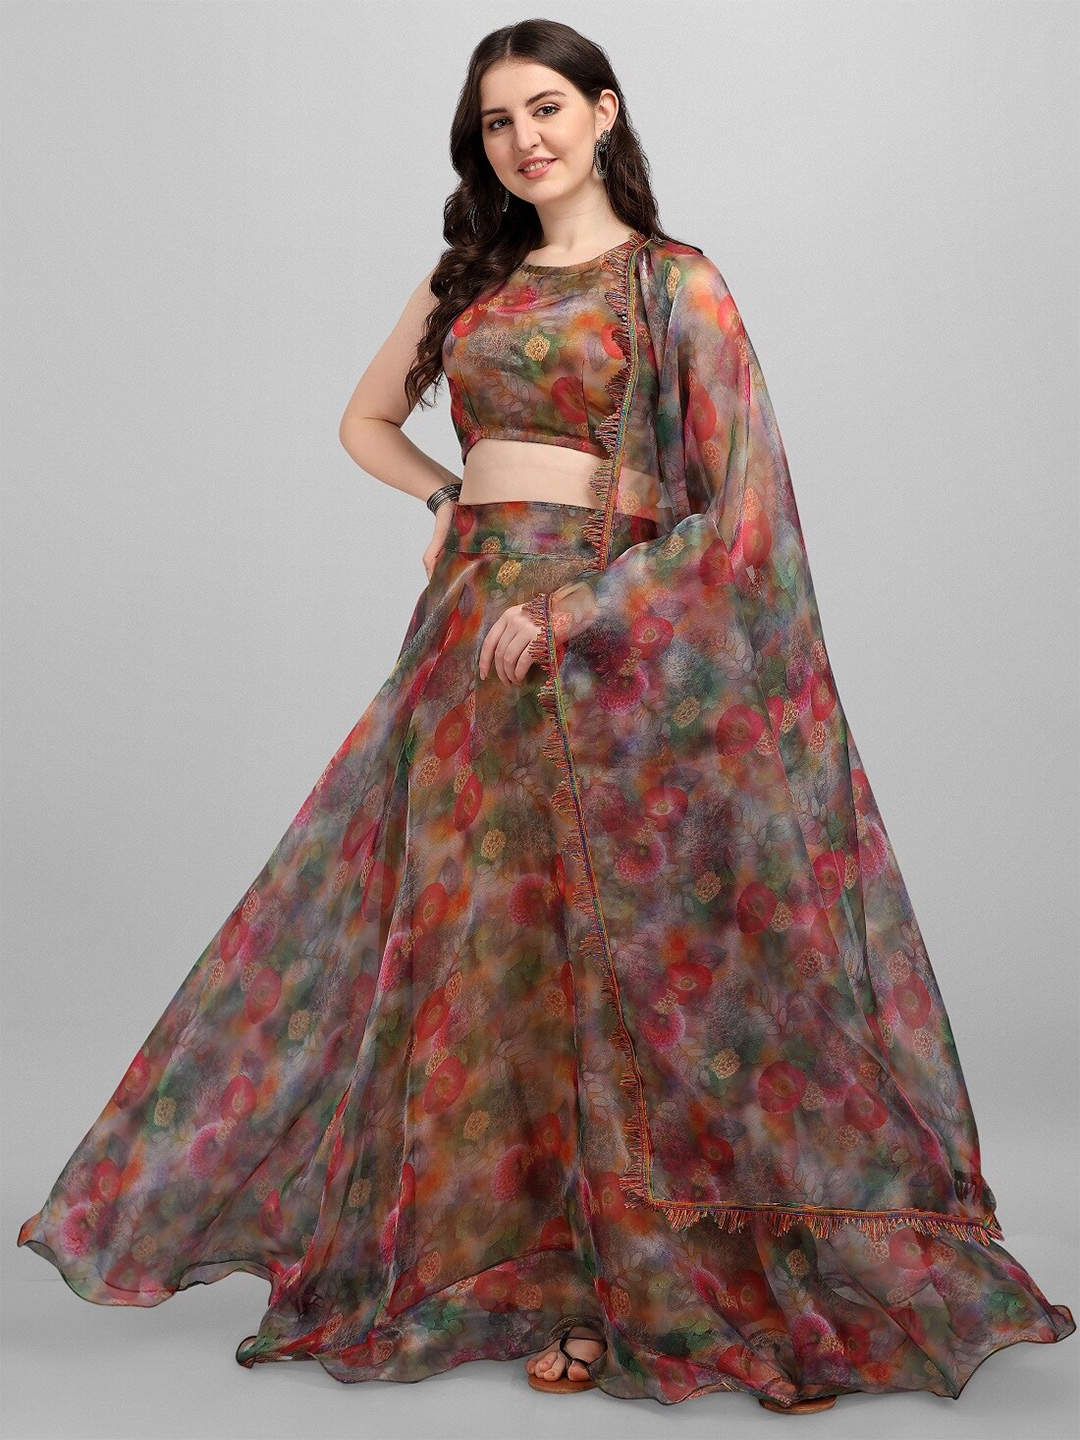 YOYO Fashion Brown & Red Printed Semi-Stitched Lehenga & Unstitched Blouse With Dupatta Price in India